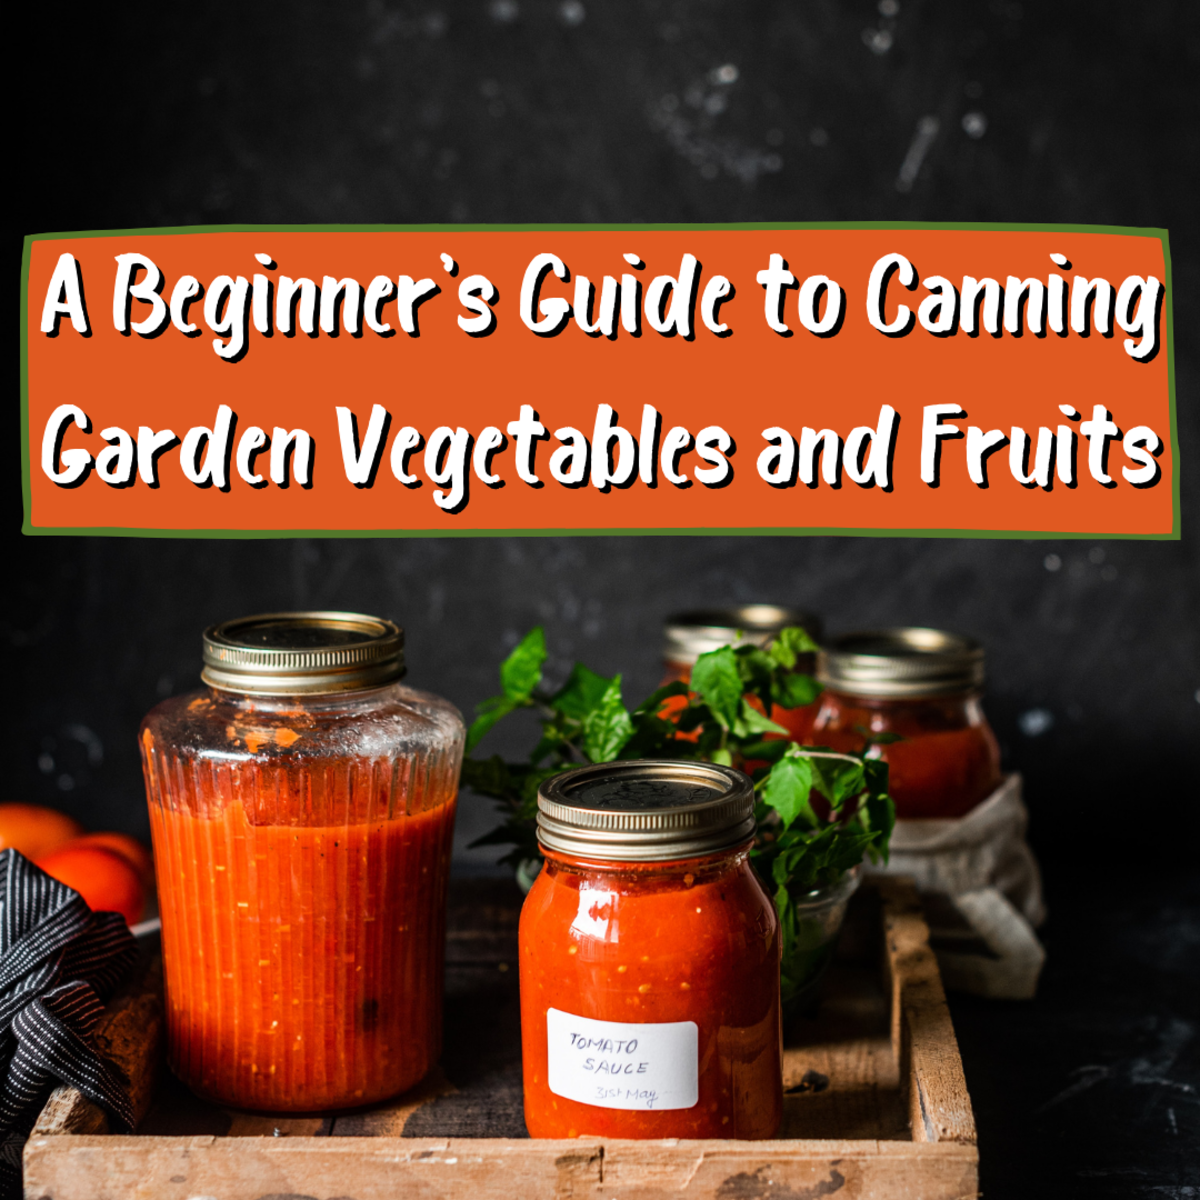 This article provides guidance on how to start canning summer fruits and vegetables so they last for months.